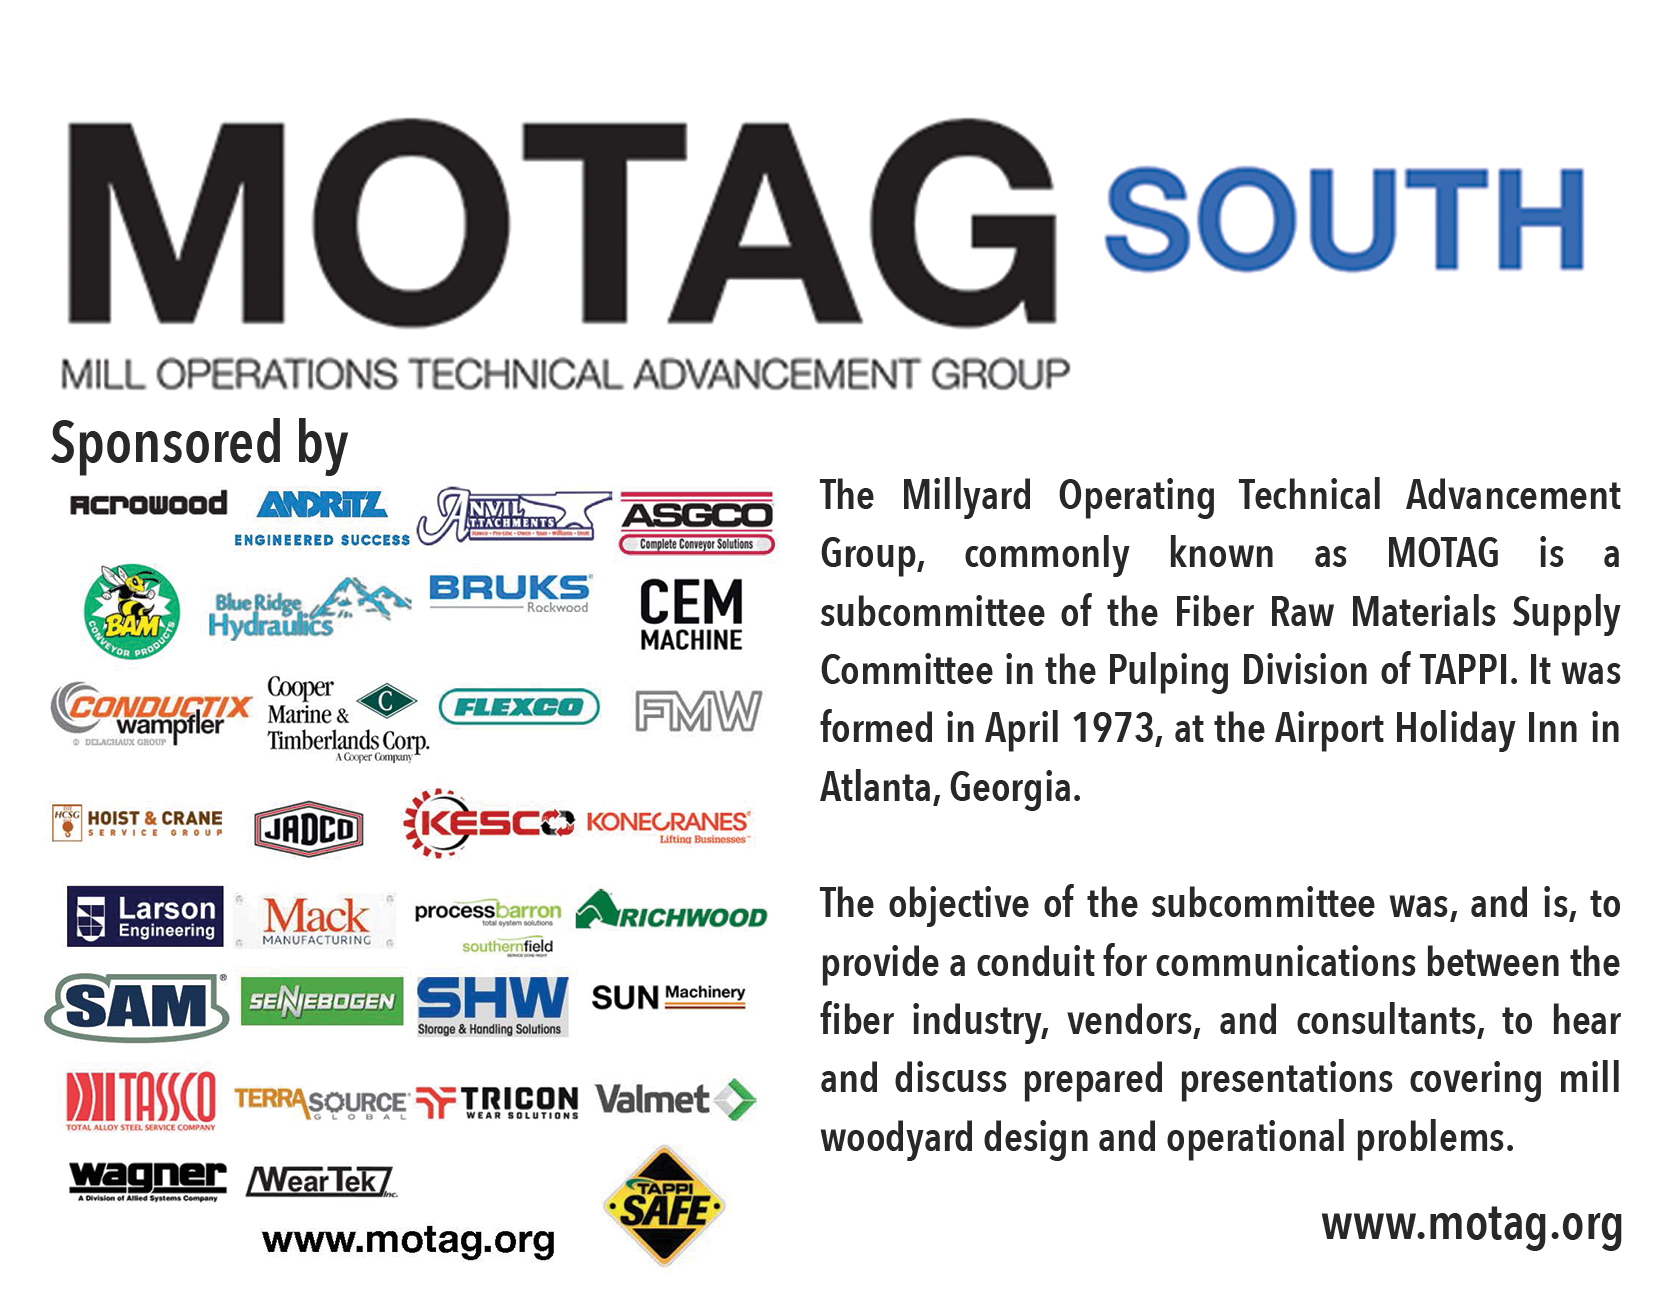 MOTAG SOUTH SPONSORS 2019 – POST CARD SIDE 2